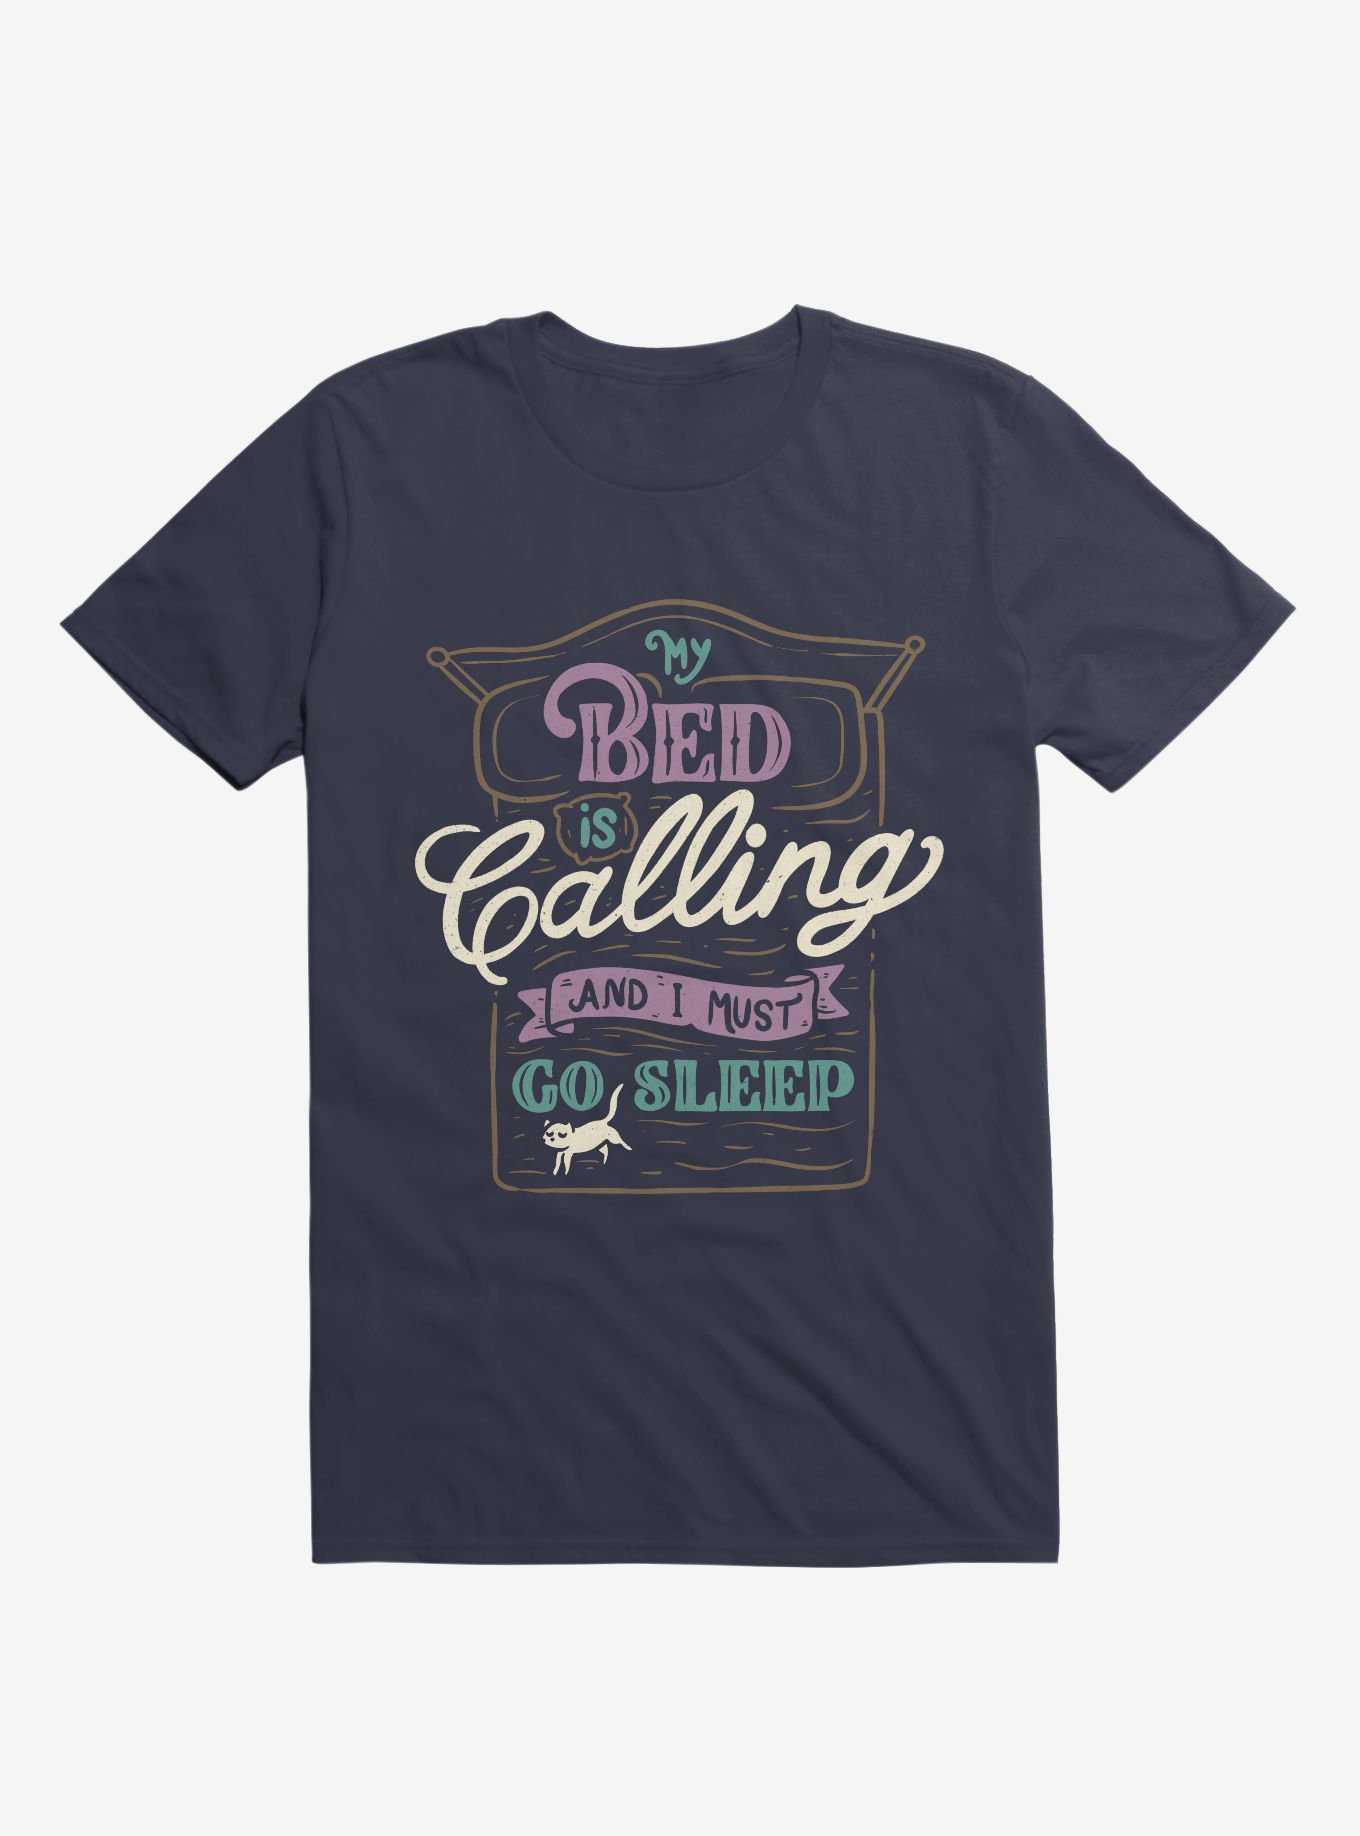 My Bed Is Calling And I Must Go Sleep Navy Blue T-Shirt, , hi-res